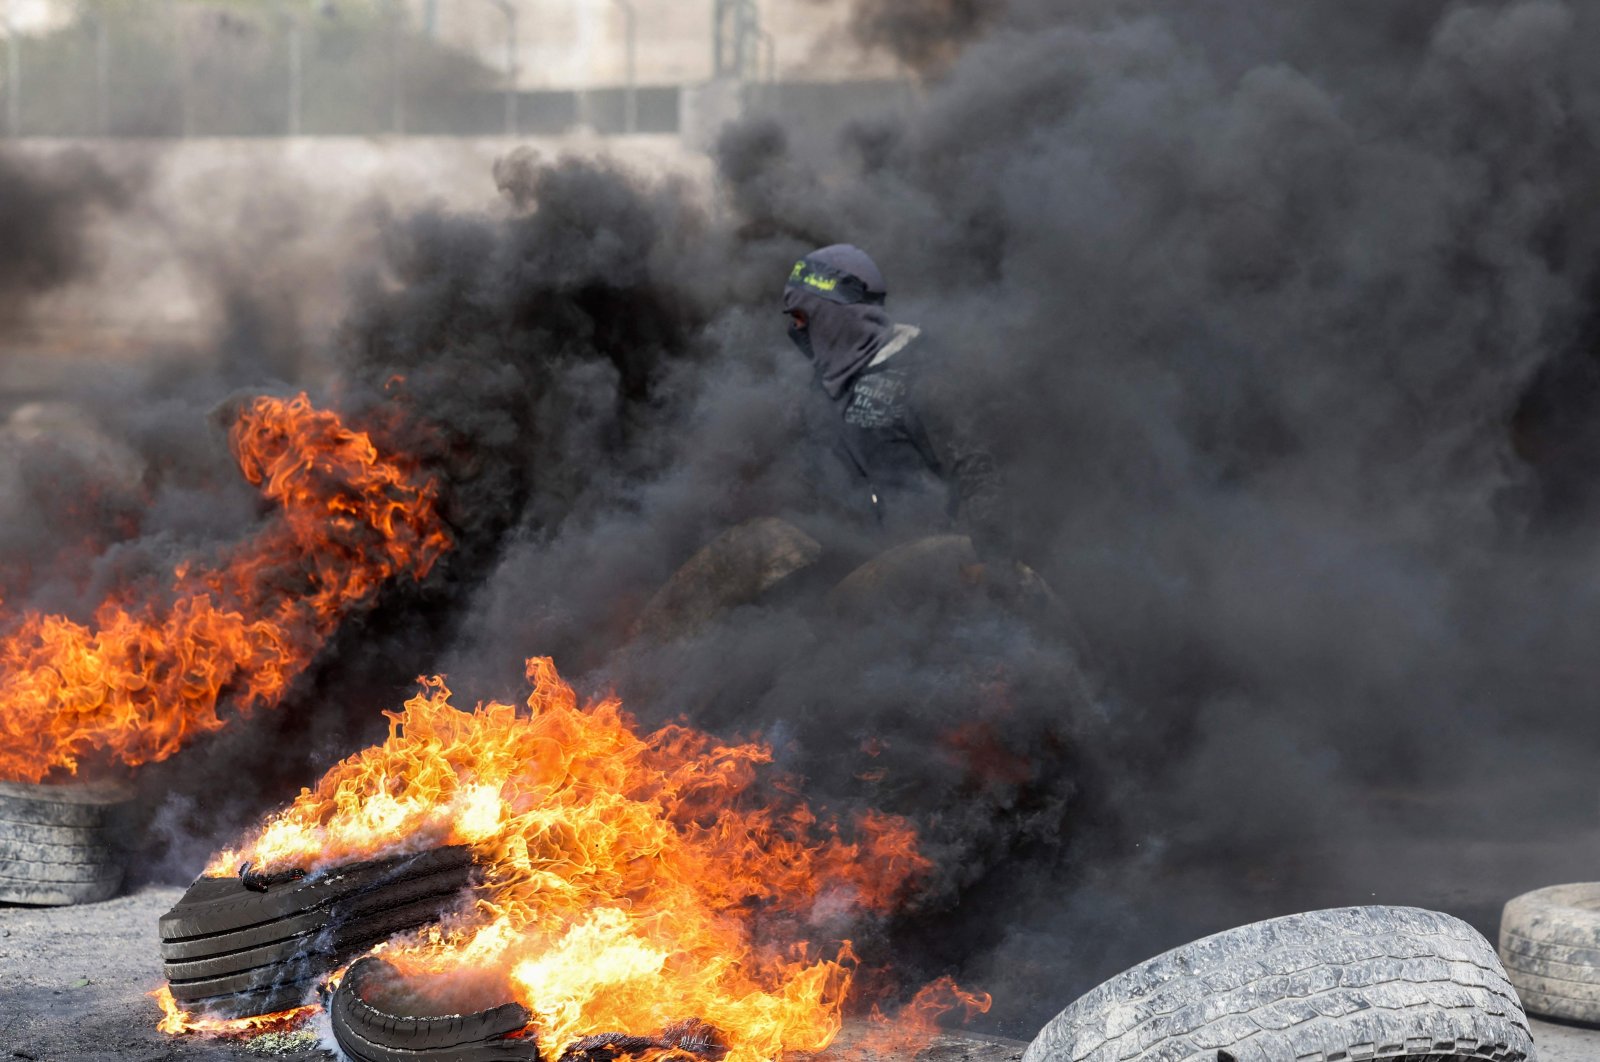 Palestinian protesters burn tires to block a road leading into Jericho in the occupied West Bank, Palestine, Feb. 6, 2023. (AFP Photo)